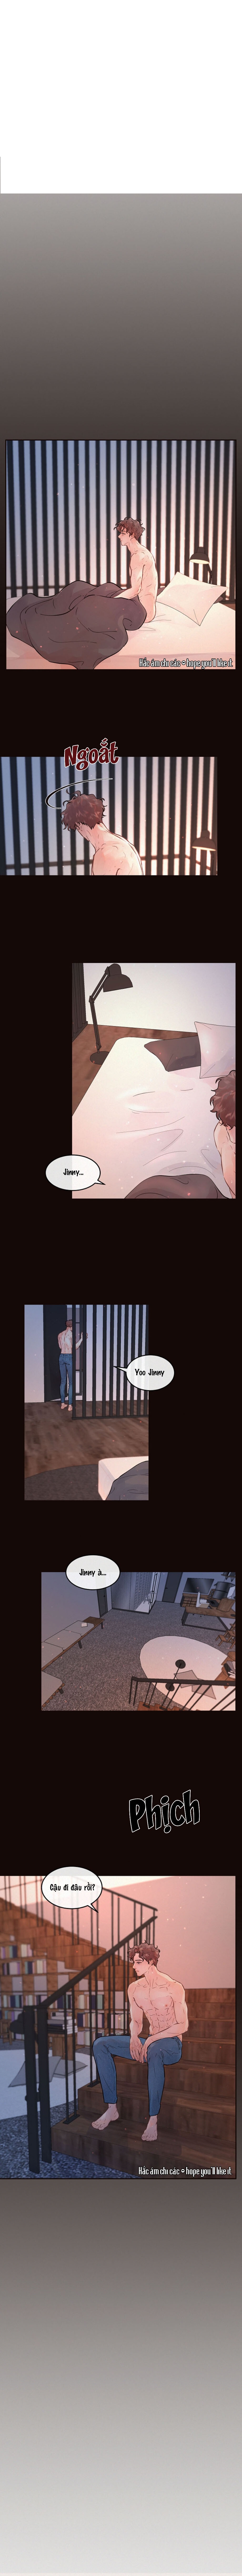 [Manhwa] How To Chase An Alpha?